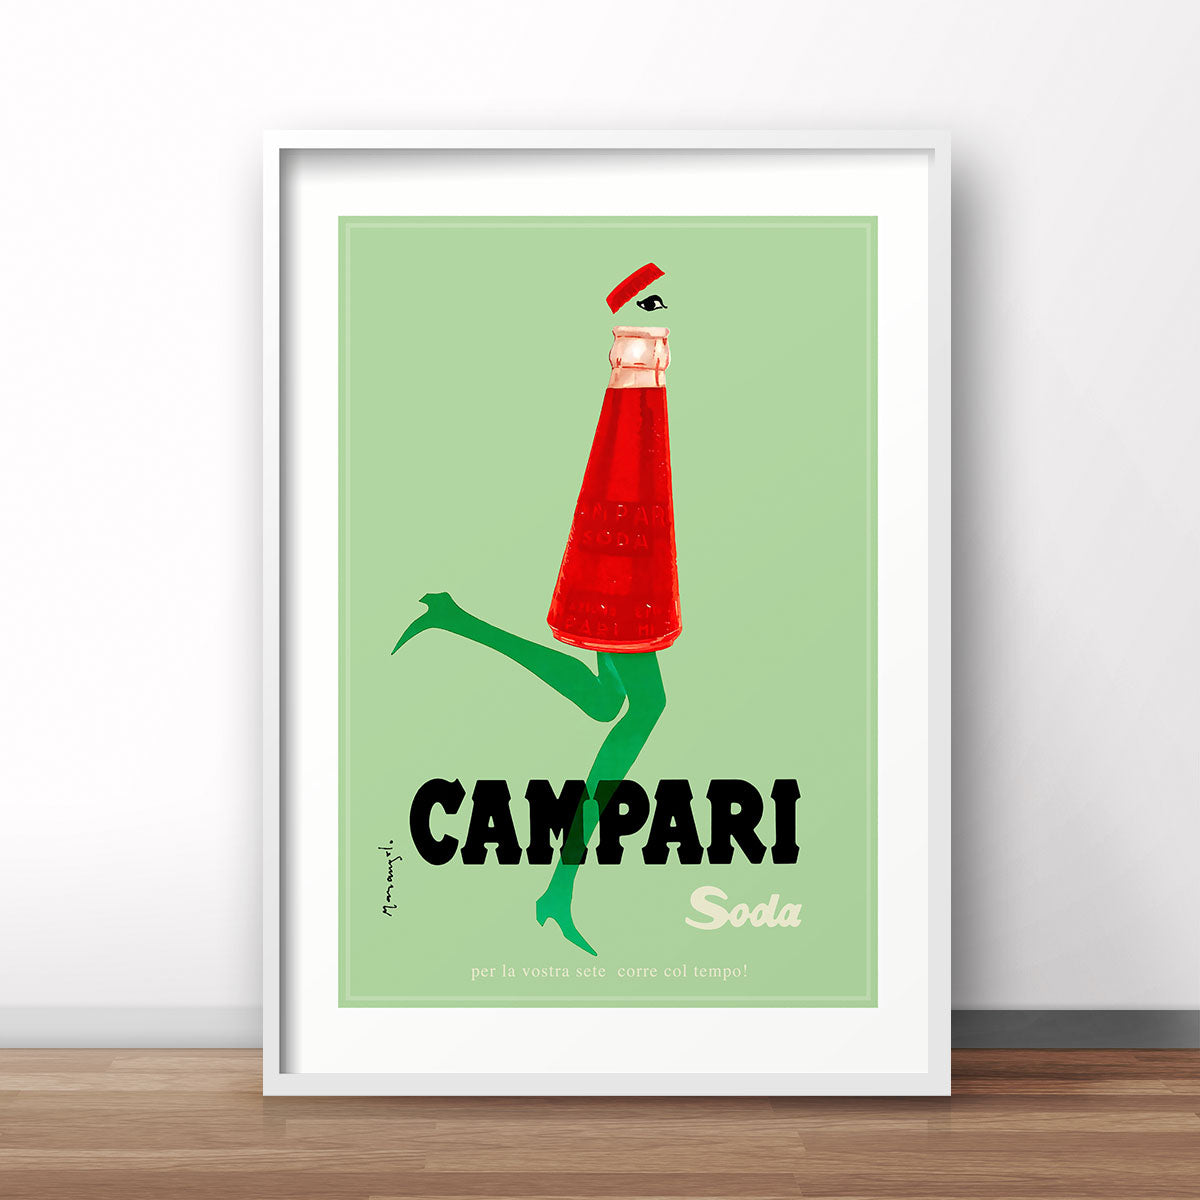 Campari Soda skipping retro vintage poster print from Places We Luv